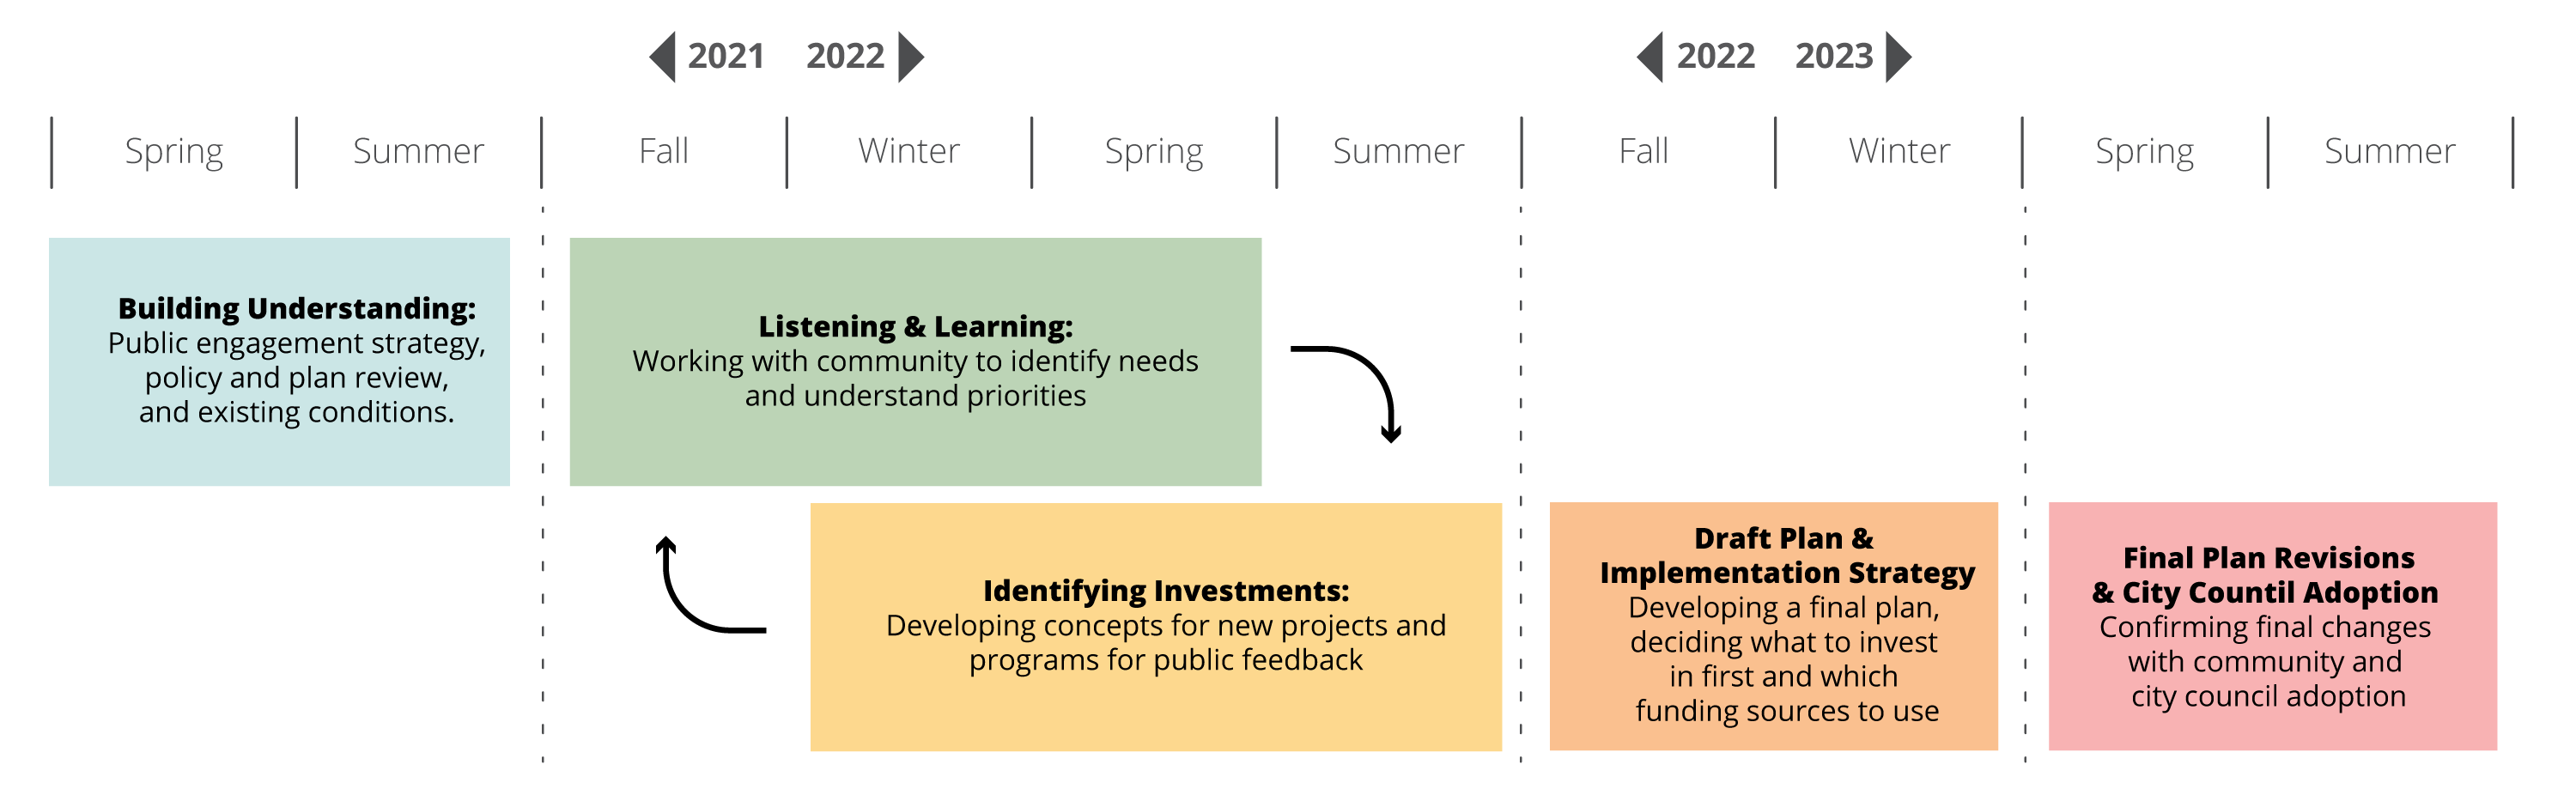 Timeline|Spring/Summer 2021: Building Understanding. Fall 2021 through Summer 2022: Listening and learning, identifying investments. Fall/Winter 2022: Draft Plan and Implementation Strategy. Spring/Summer 2023: Final Plan Revisions and City Council Adoption.